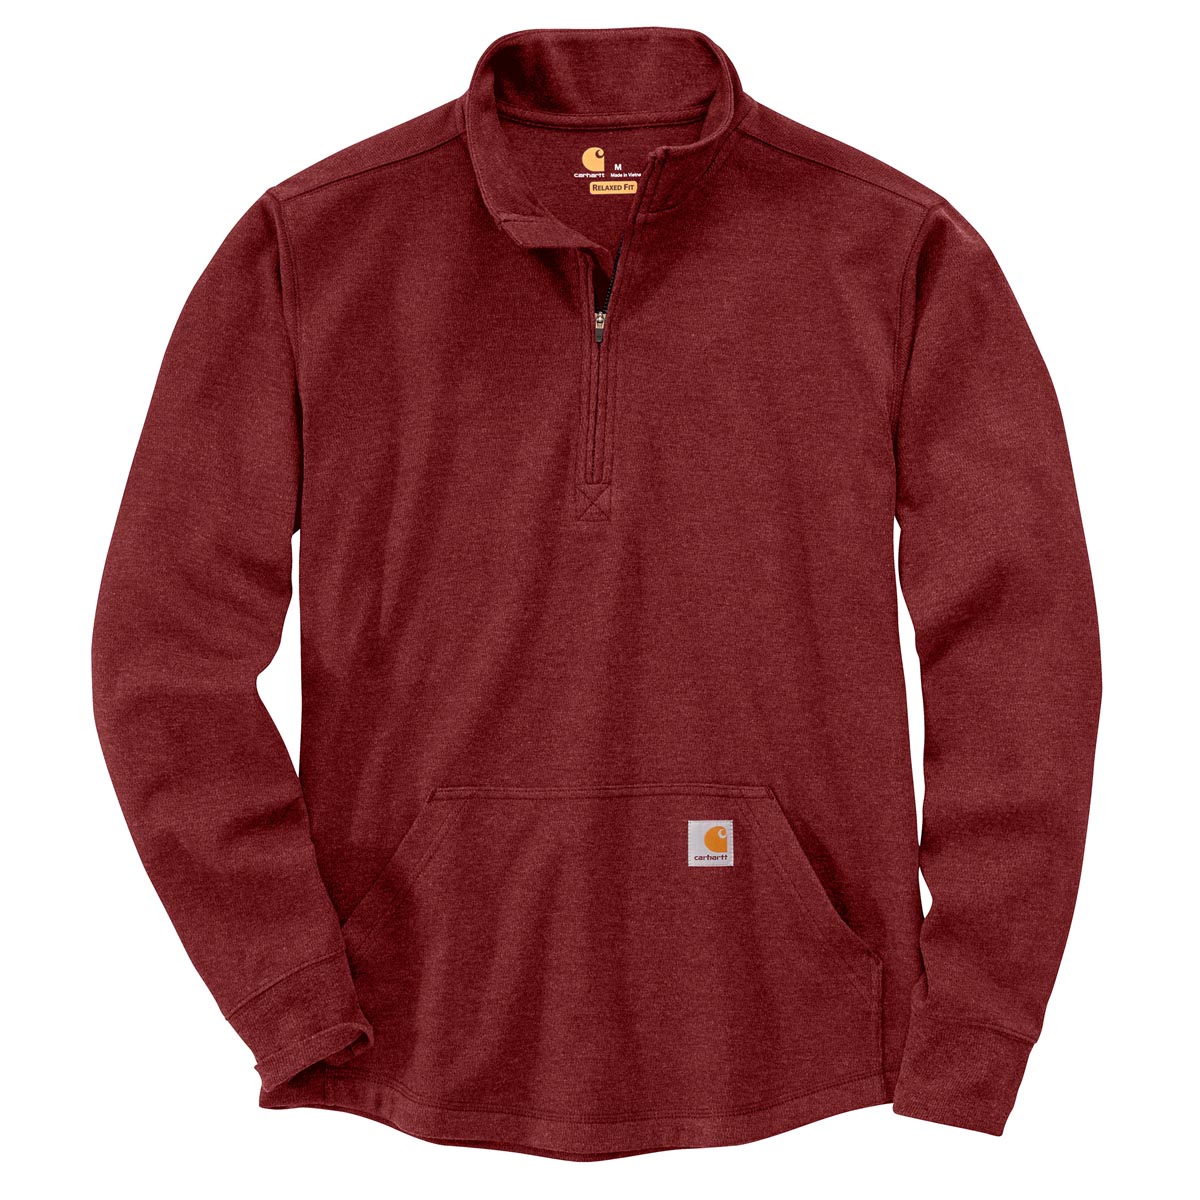 Carhartt Men's Relaxed Fit Heavyweight LS Half Zip Thermal Shirt - Discontinued Pricing